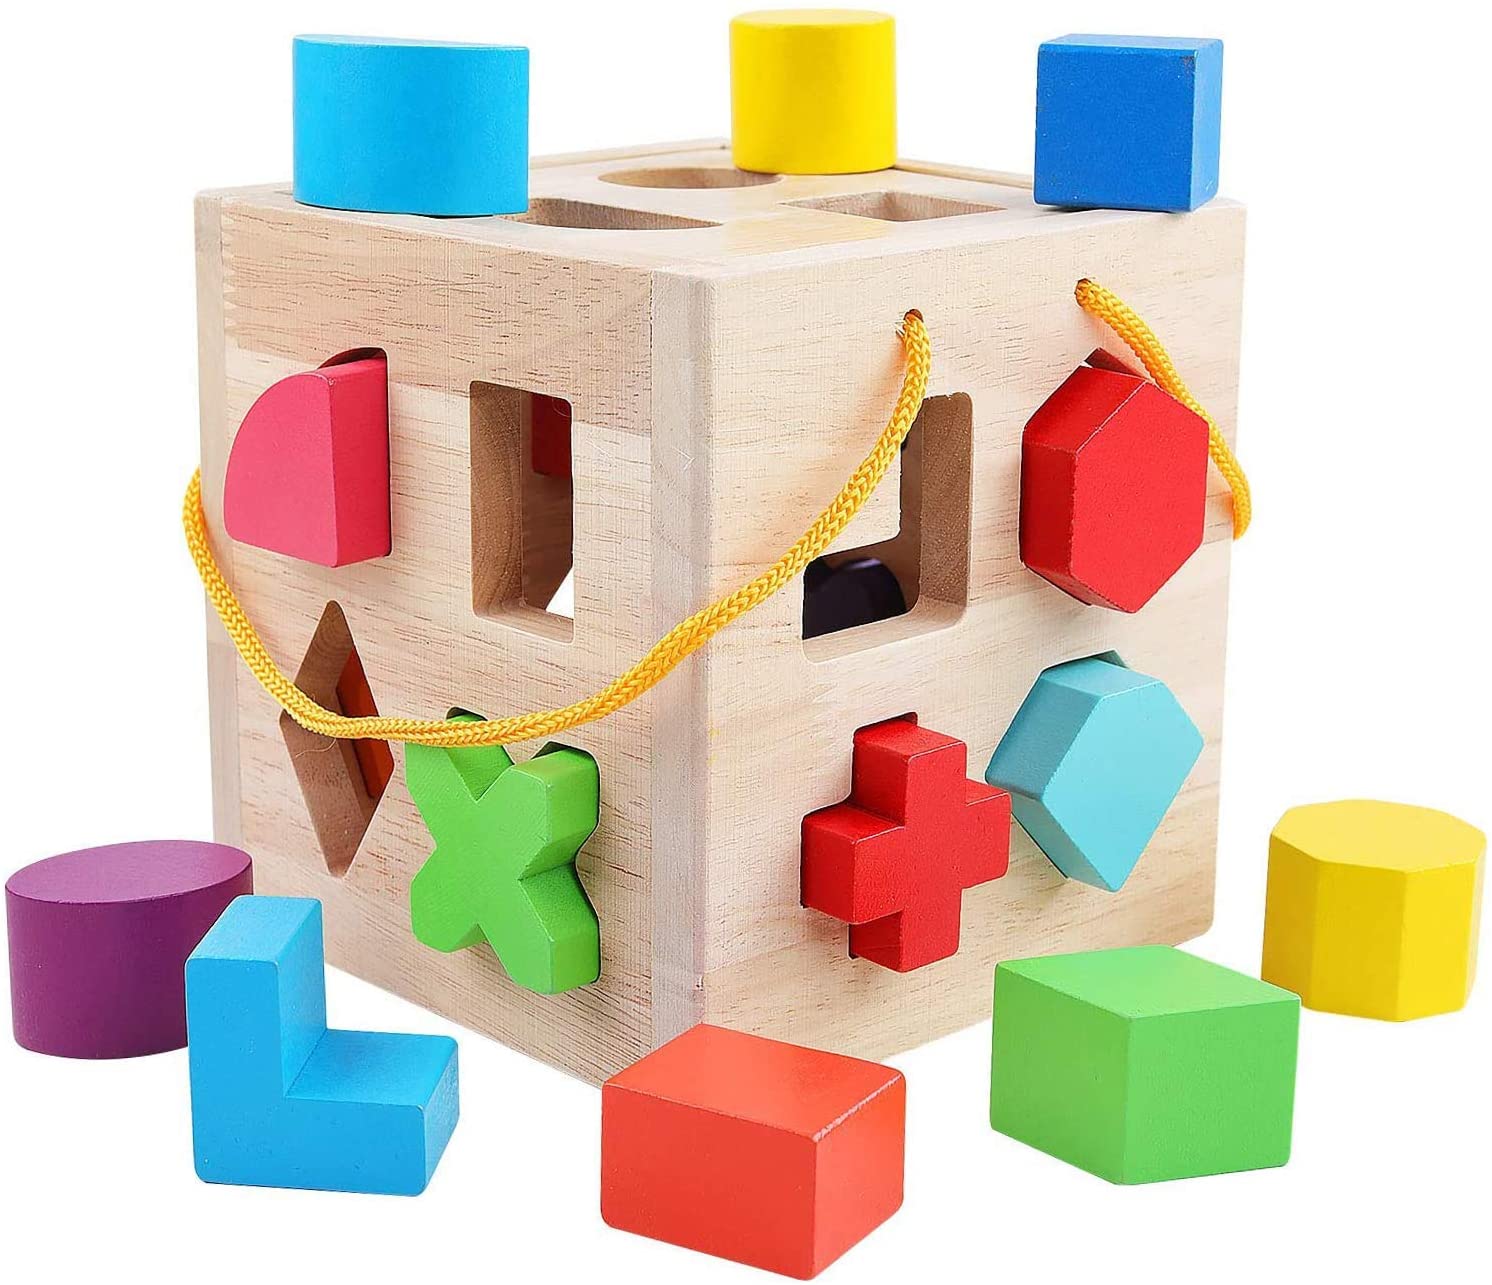 QZMTOY Wooden Shape Sorting Toy For Toddlers